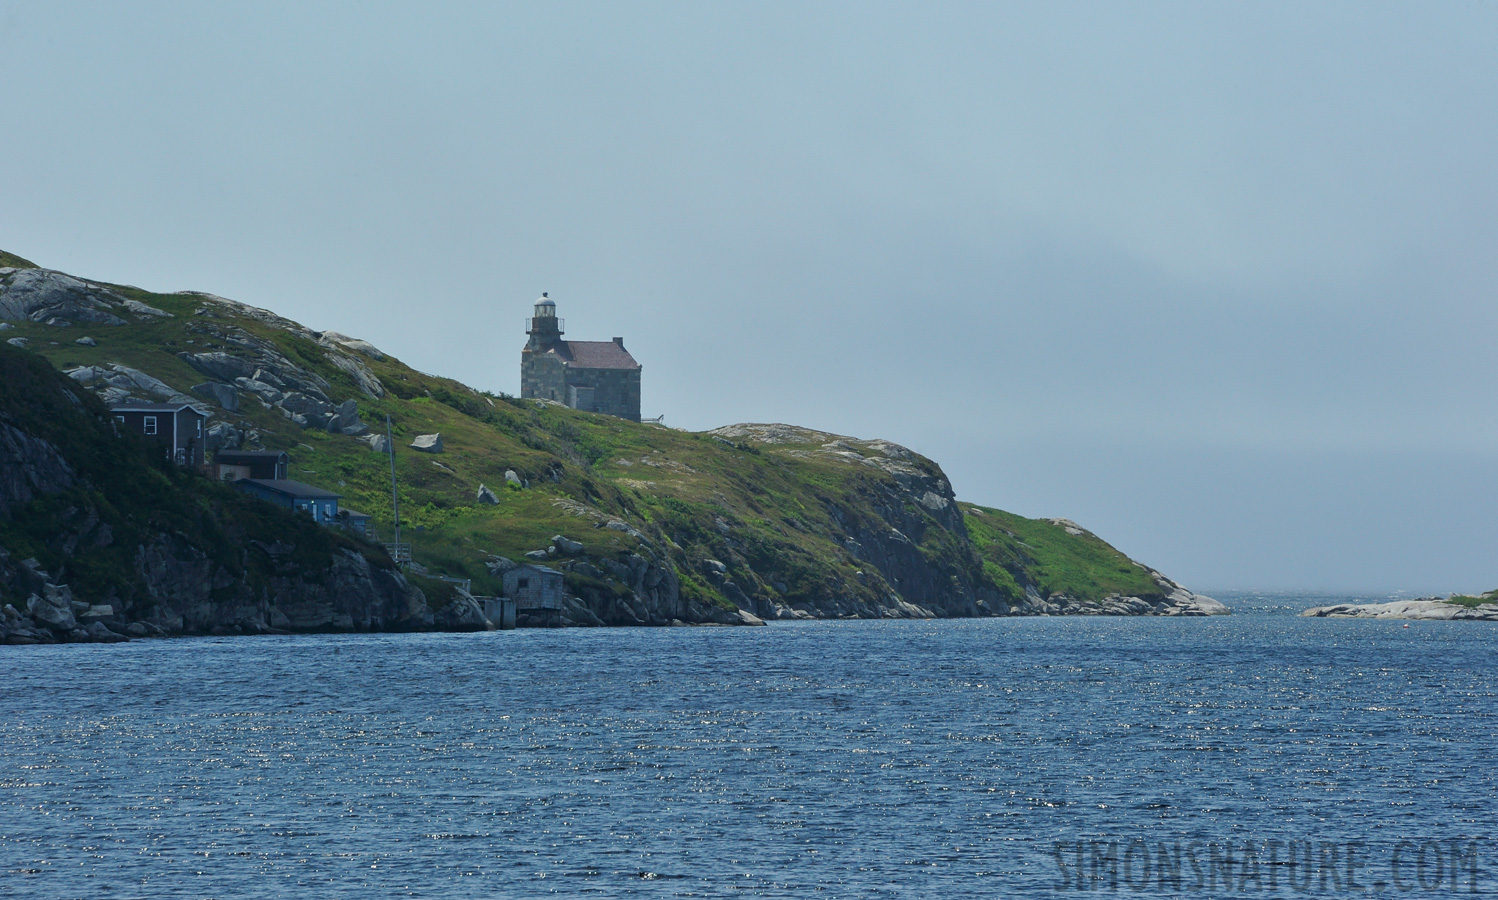 The south coast near Port aux Basque [300 mm, 1/800 sec at f / 18, ISO 800]